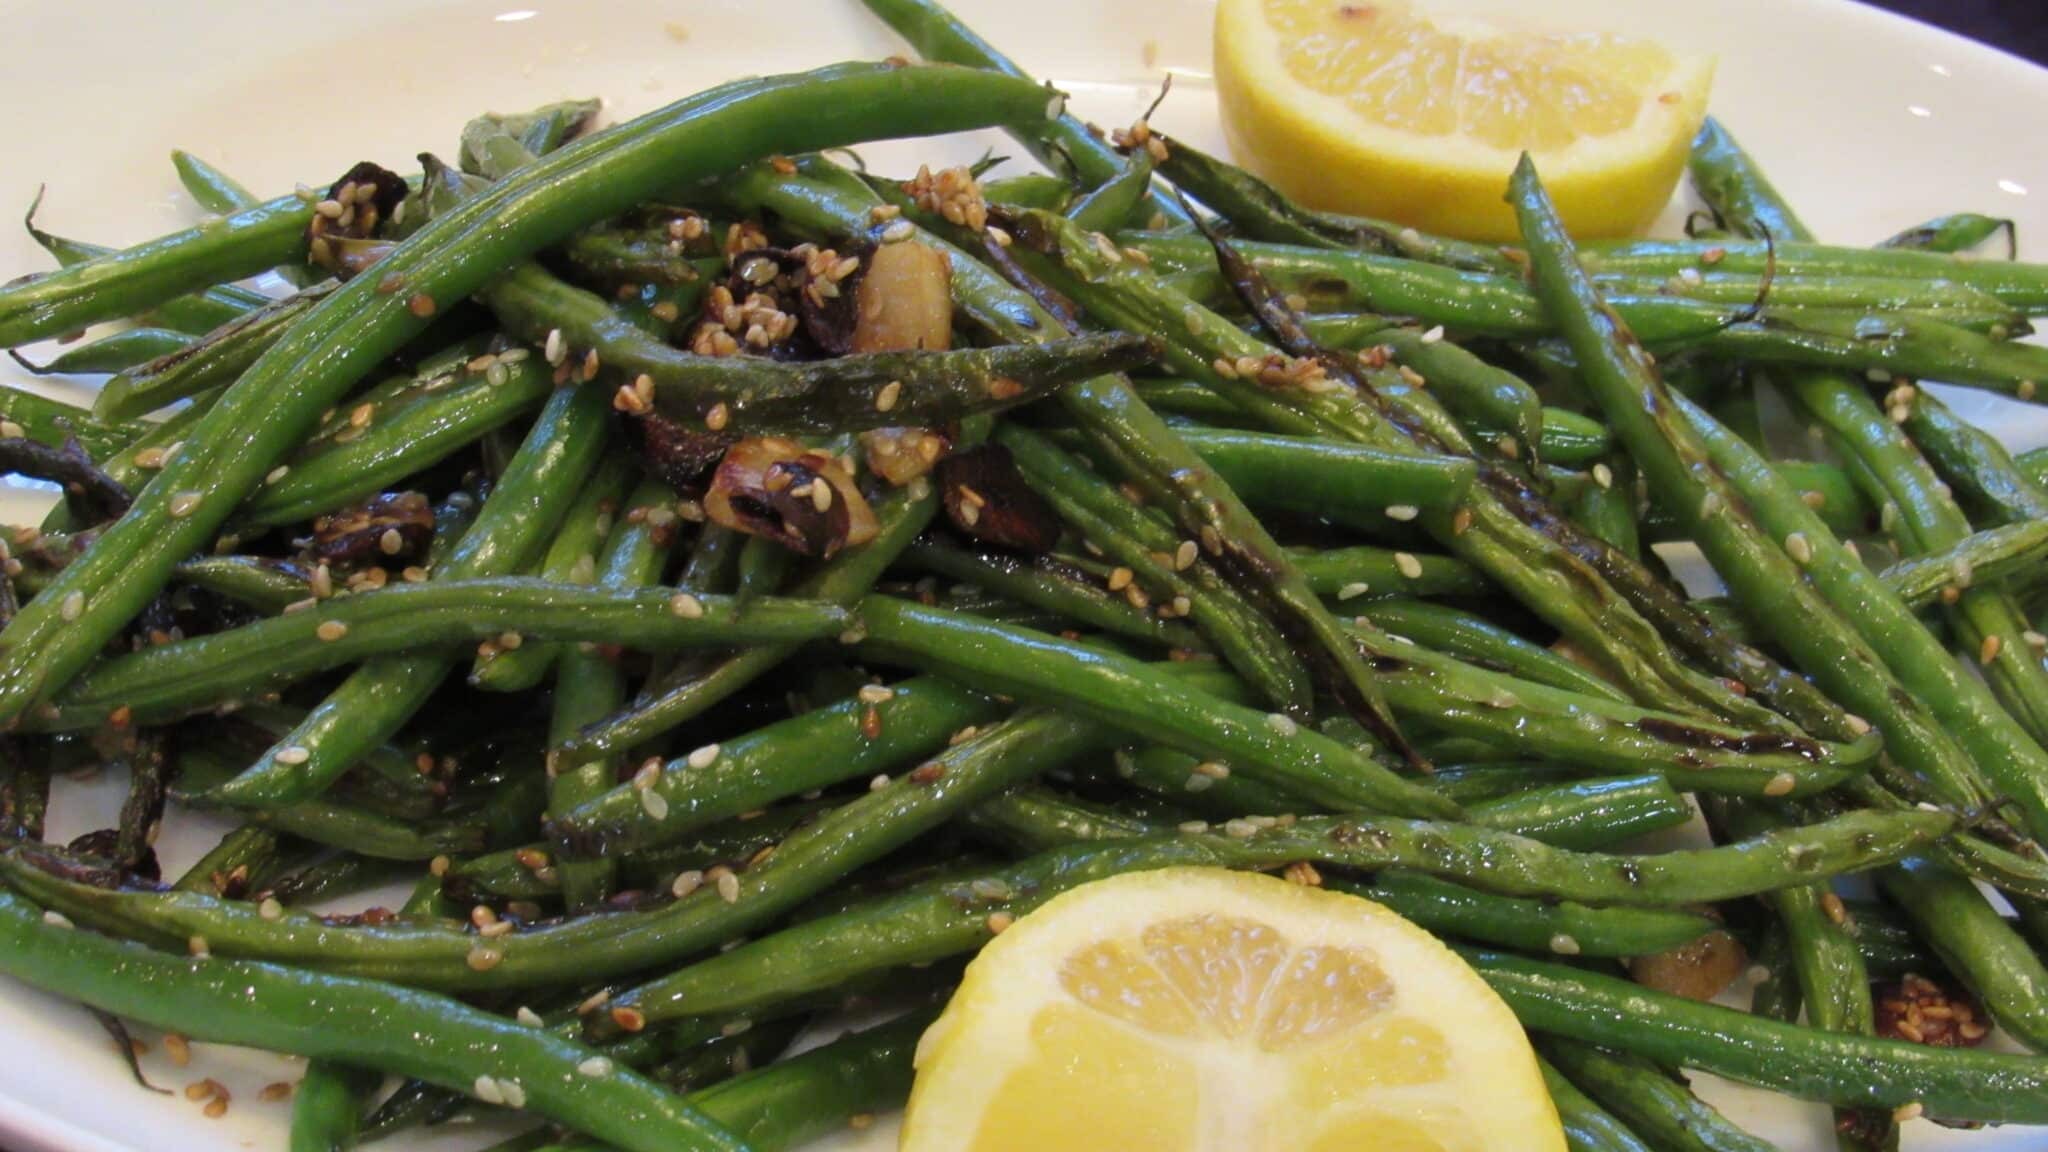 garlic sesame green beans are garnished with fresh lemon juice and served on a white plate.